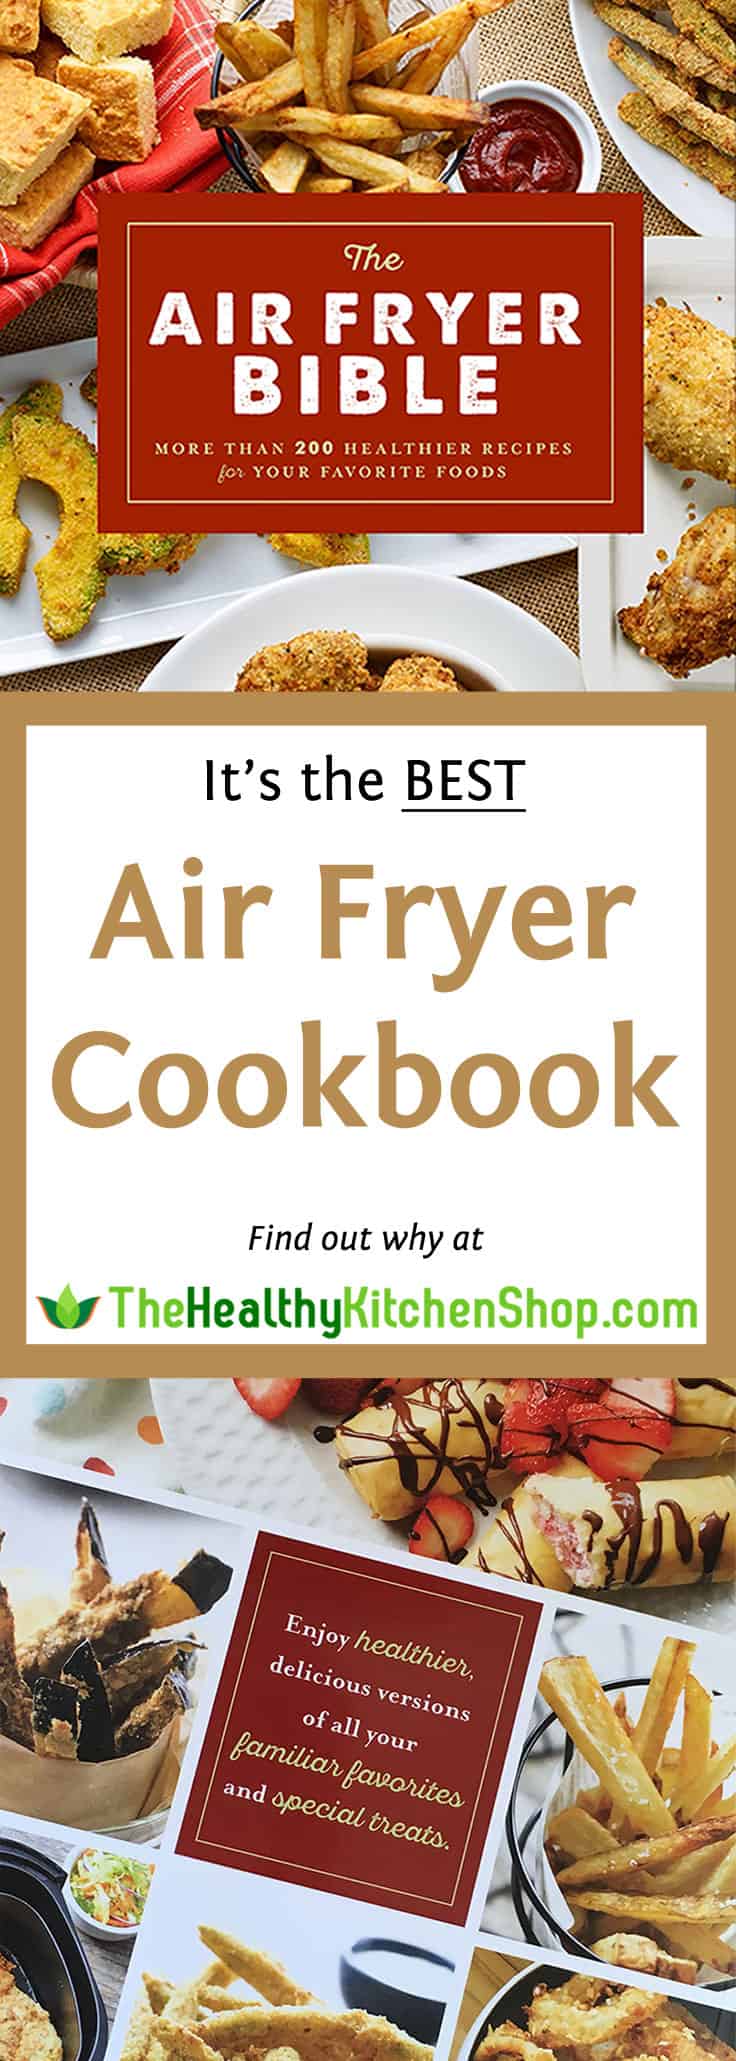 The Air Fryer Bible is the best Air Fryer Cookbook - find out why at https://thehealthykitchenshop.com/